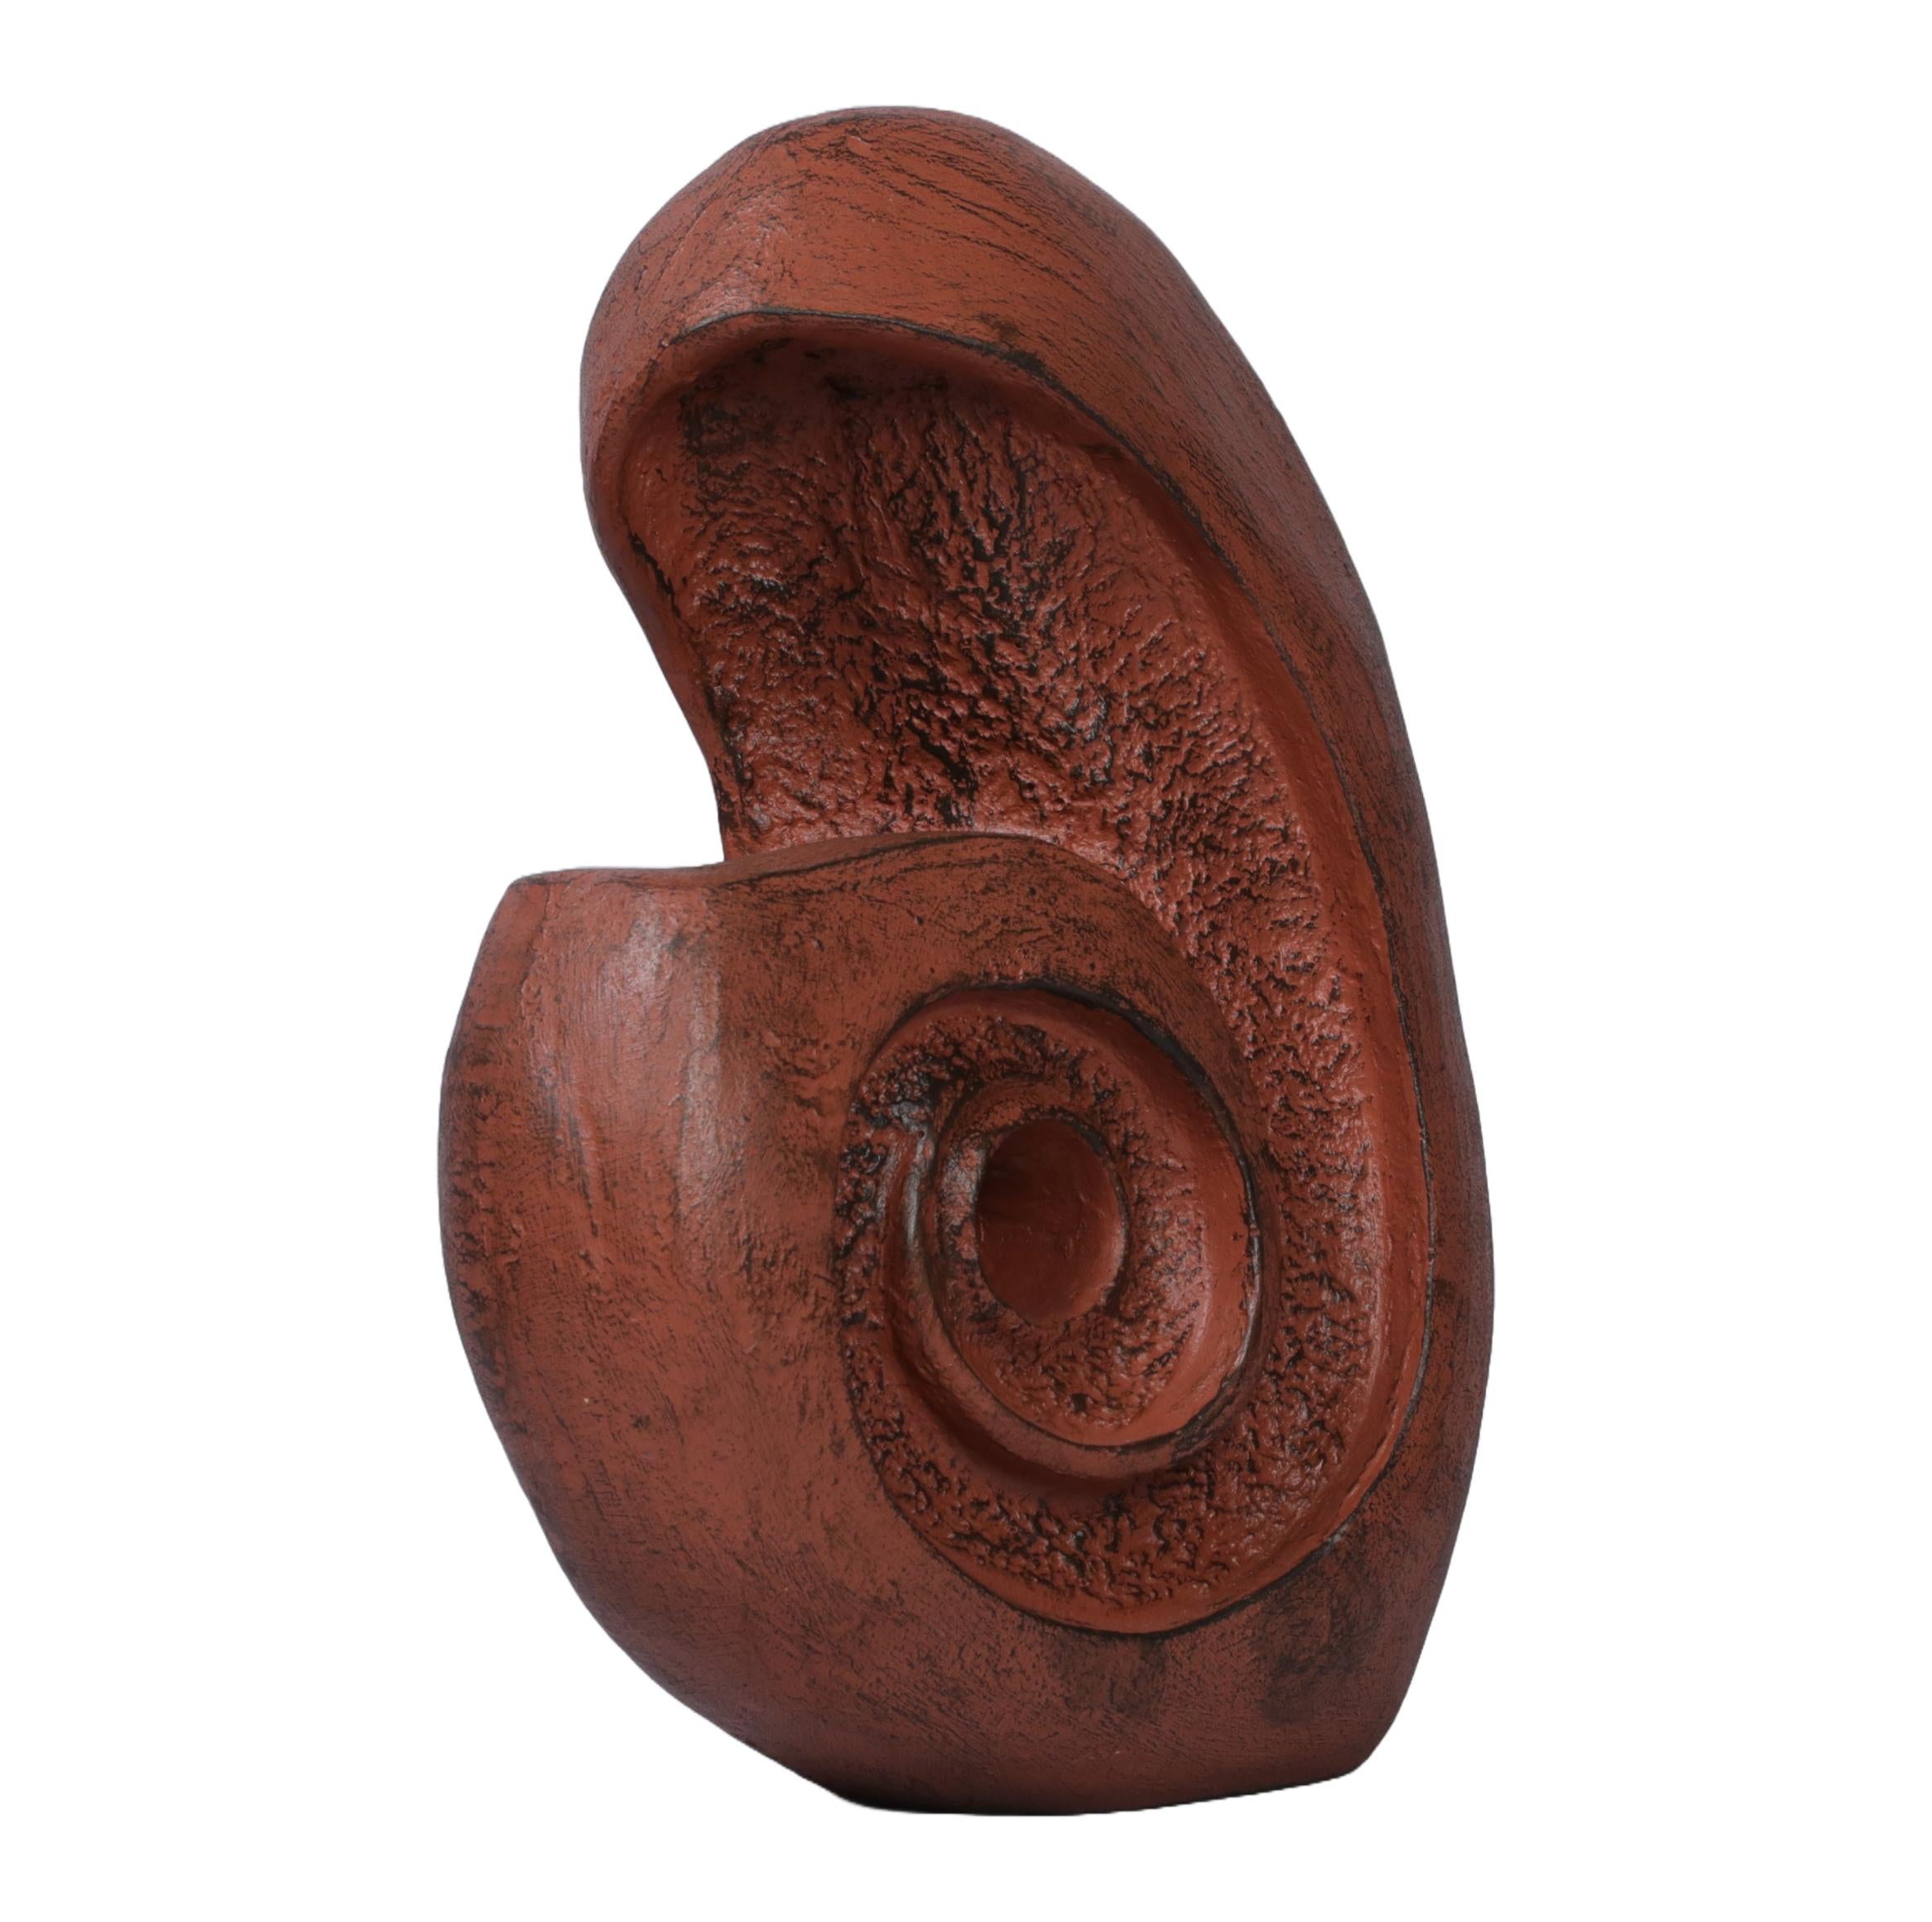 Ashnam Abstract  Modern Swirling Sculpture with Central Void - Terracotta, 25 Cm